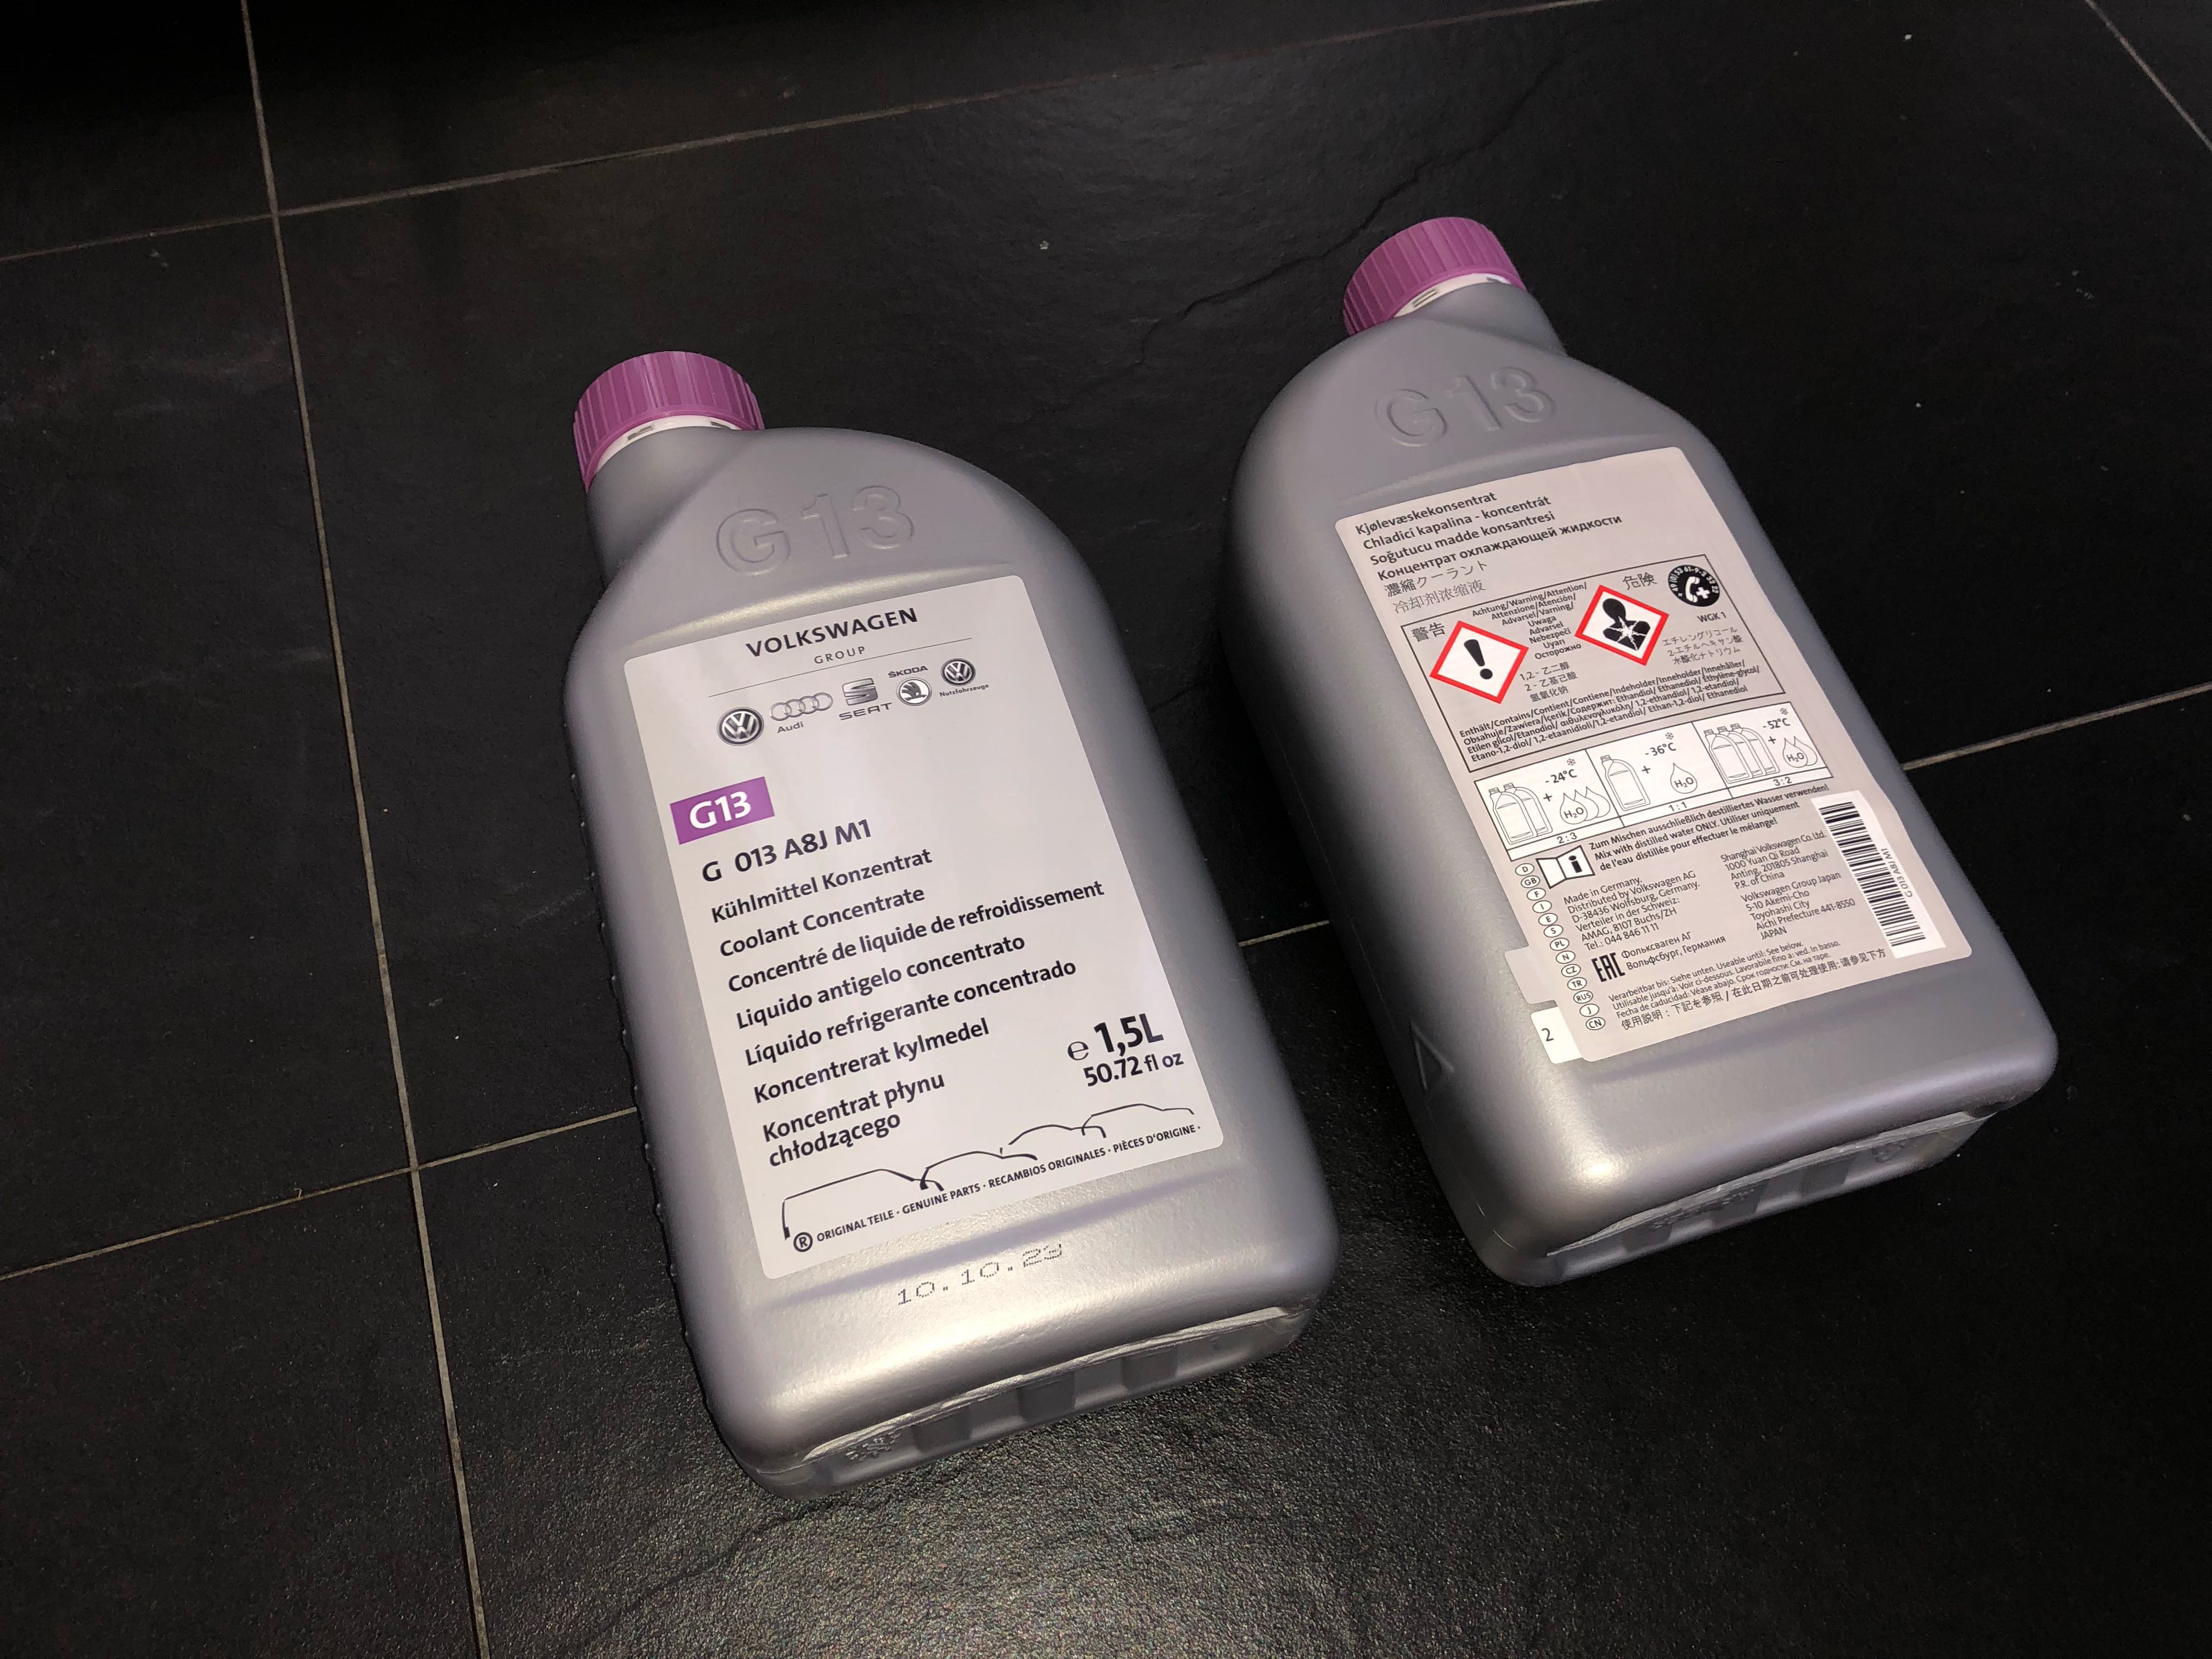 G12 Evo Coolant for VW, SEAT, AUDI, SKODA vehicles, Car Accessories, Car  Workshops & Services on Carousell